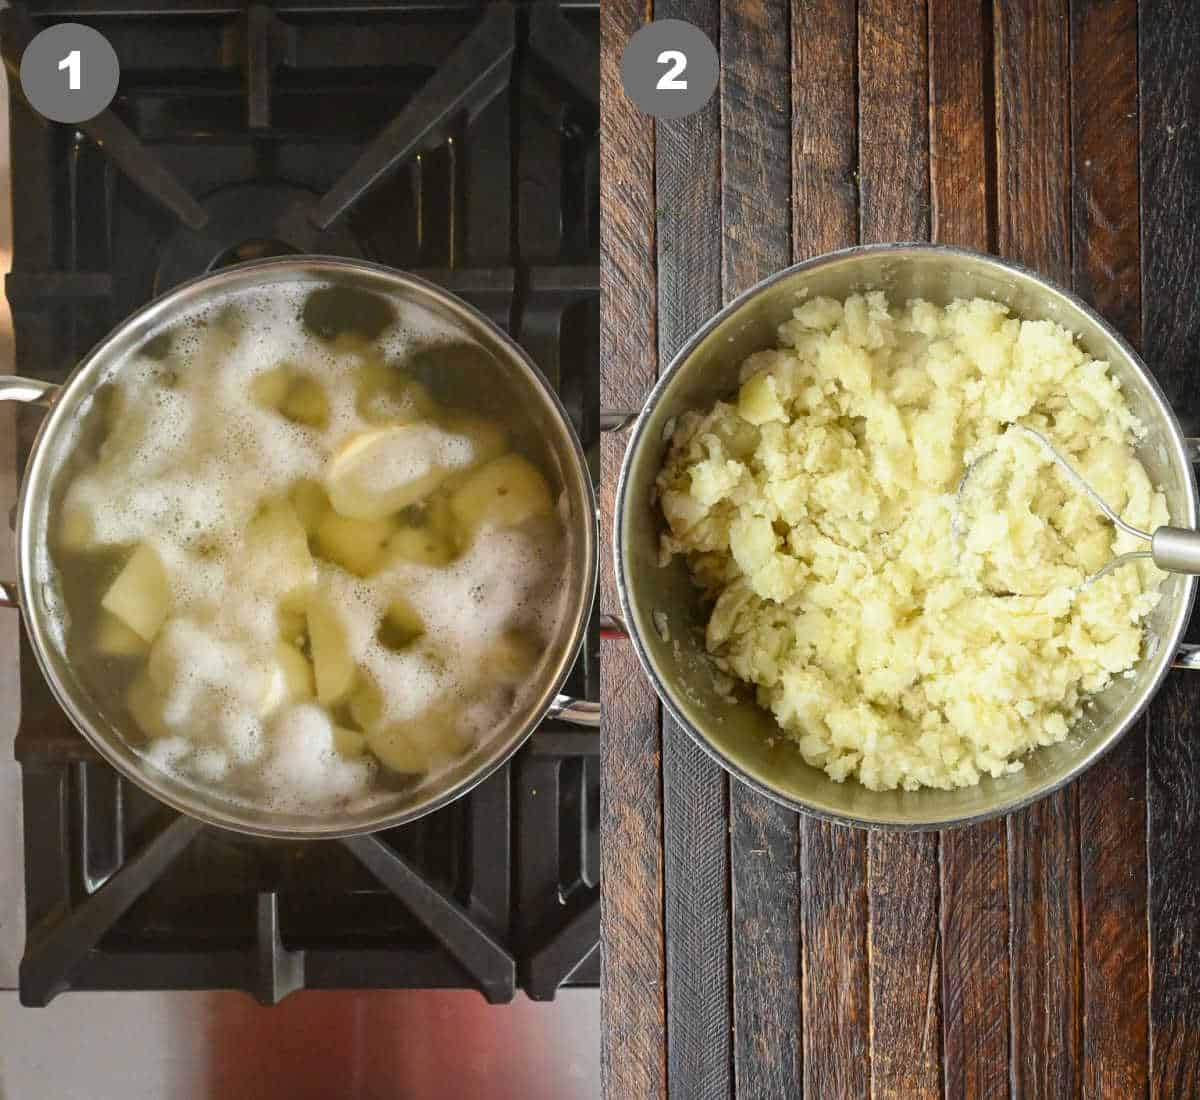 Potatoes being boiled in a pot, drained and smashed.